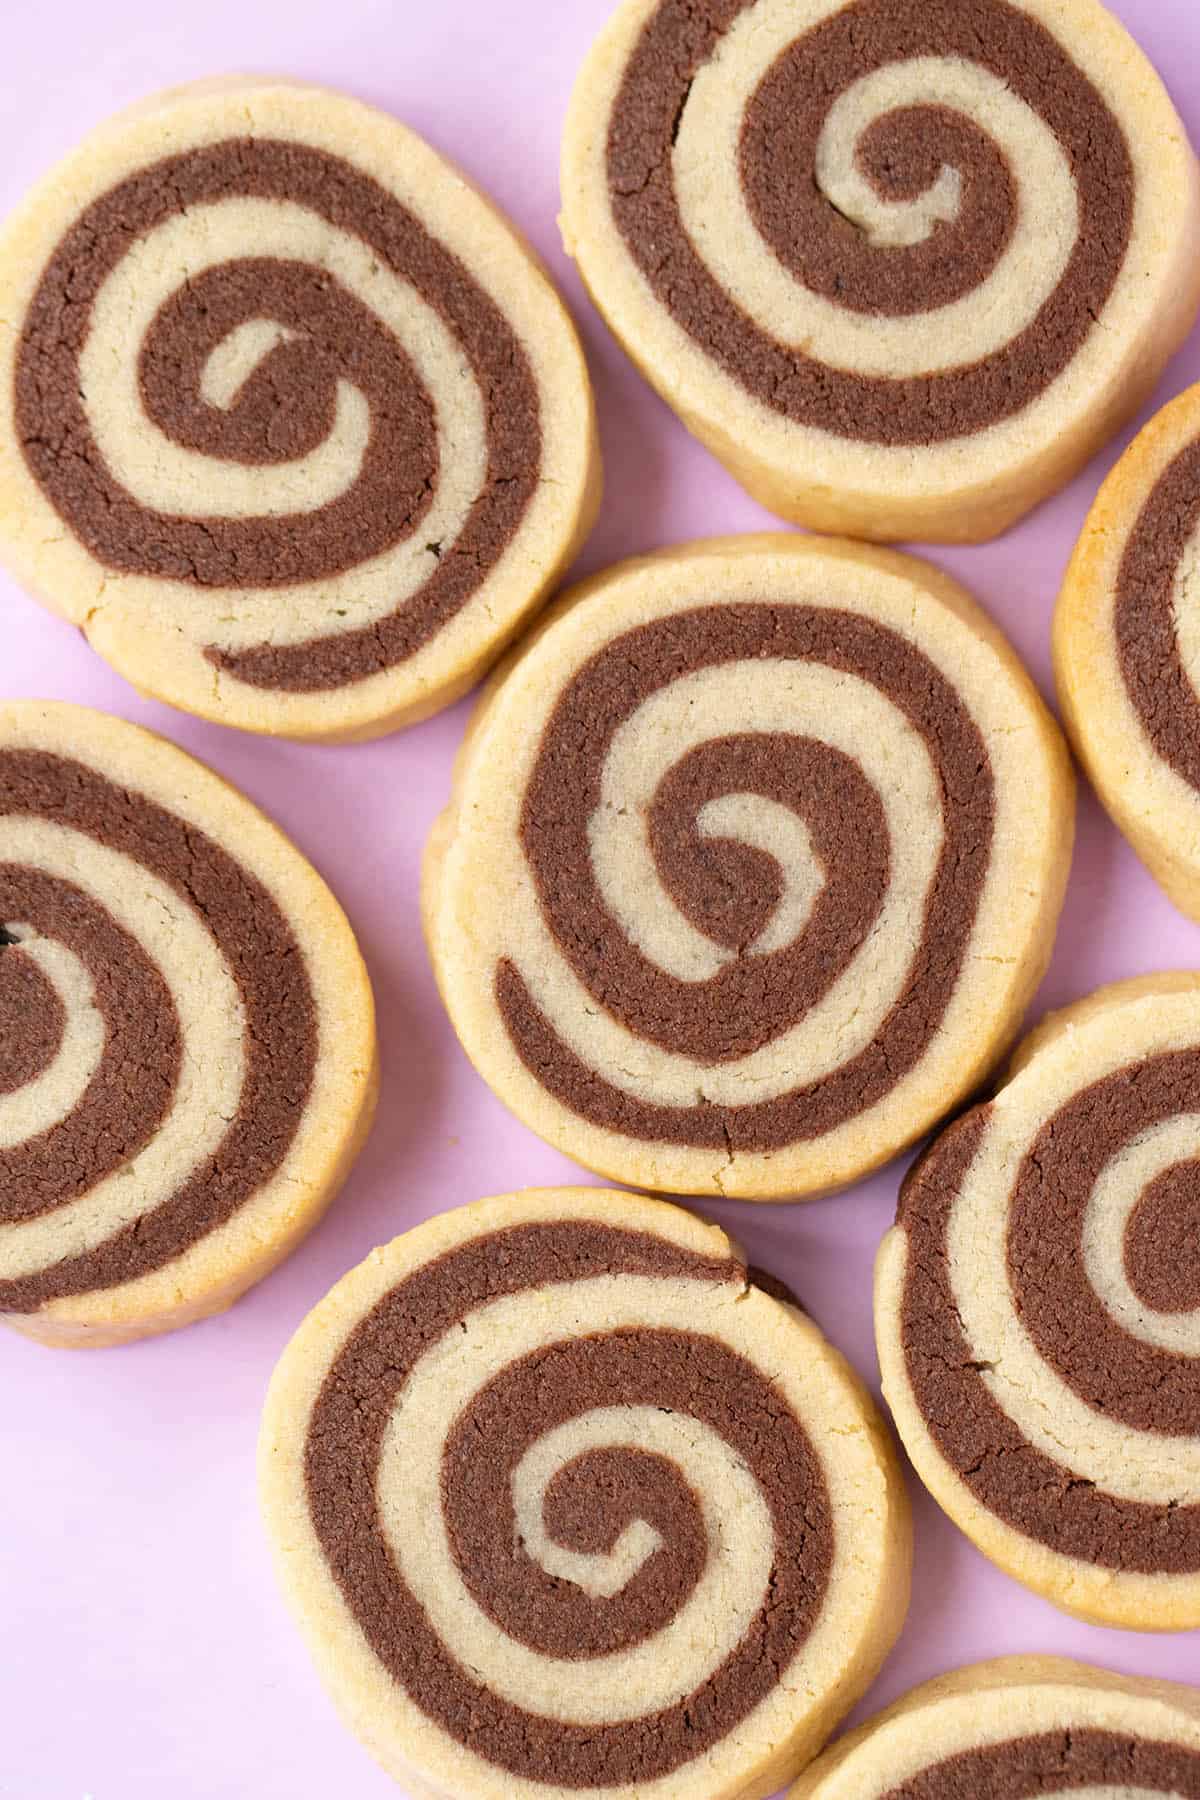 Top view of perfectly swirled Pinwheel Cookies on a purple background.